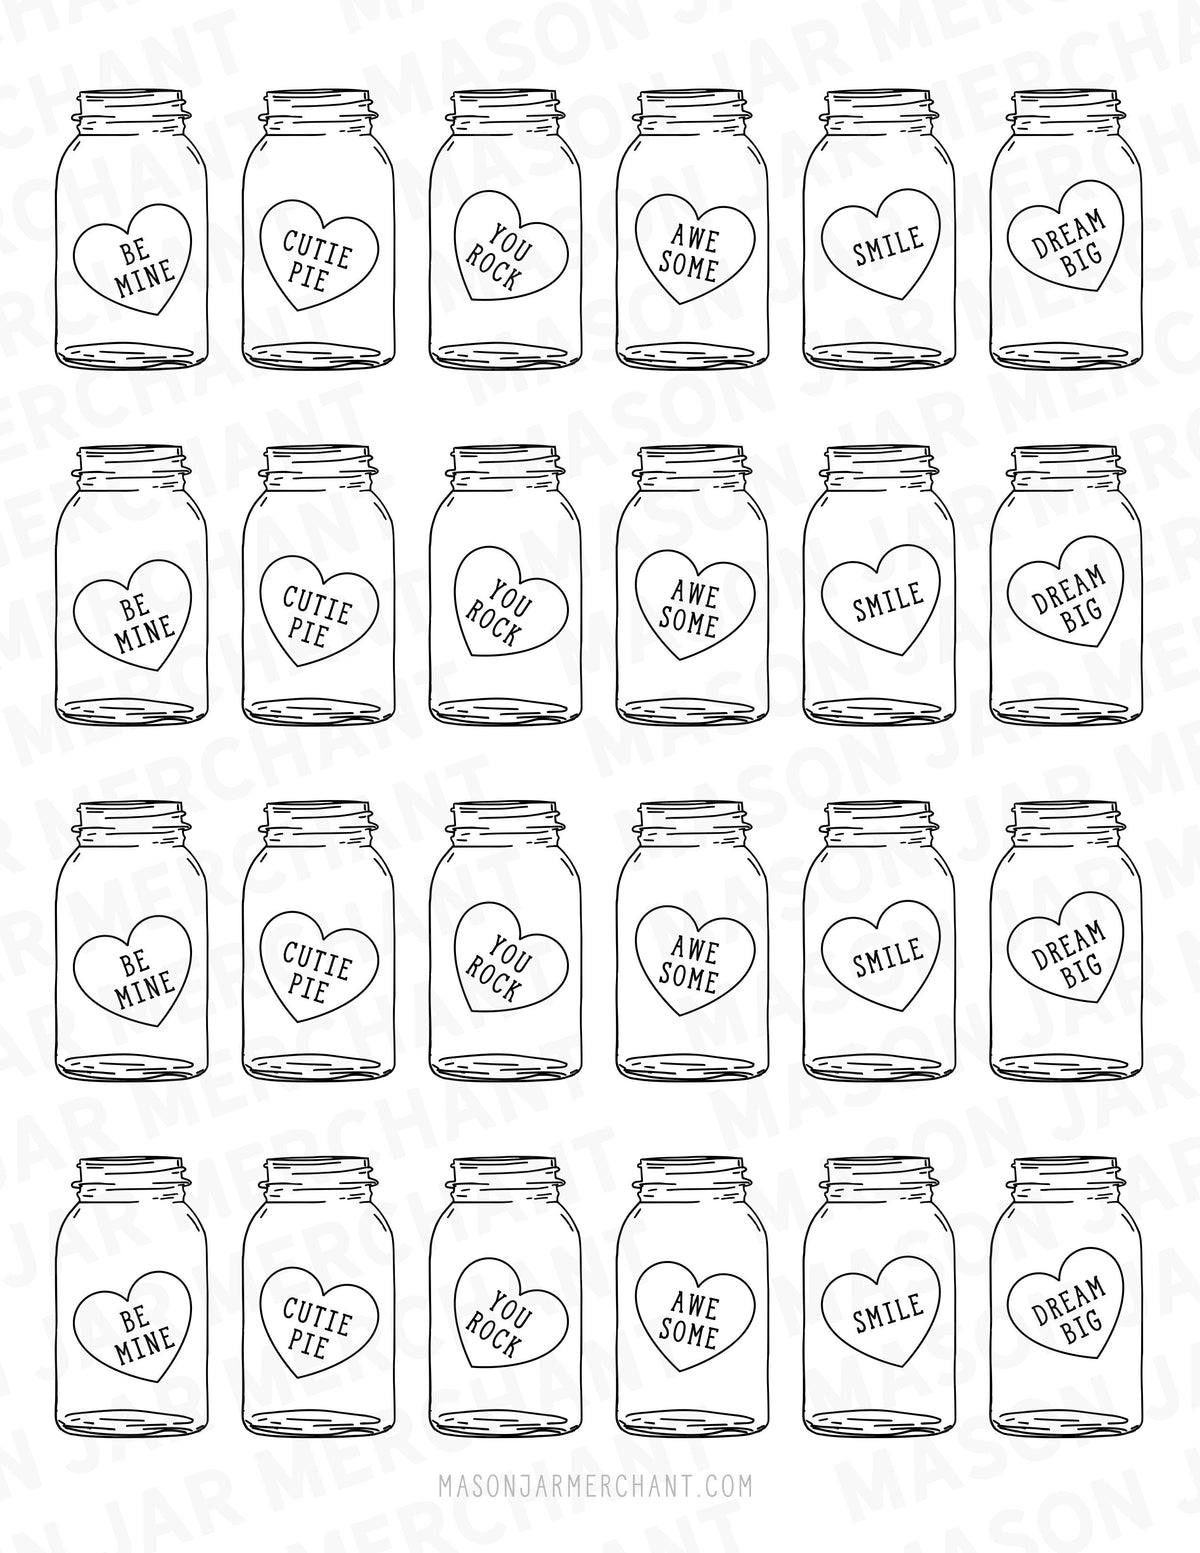 black and white candy heart mason jar shaped valentines SVG download color and cut and use as gift tags